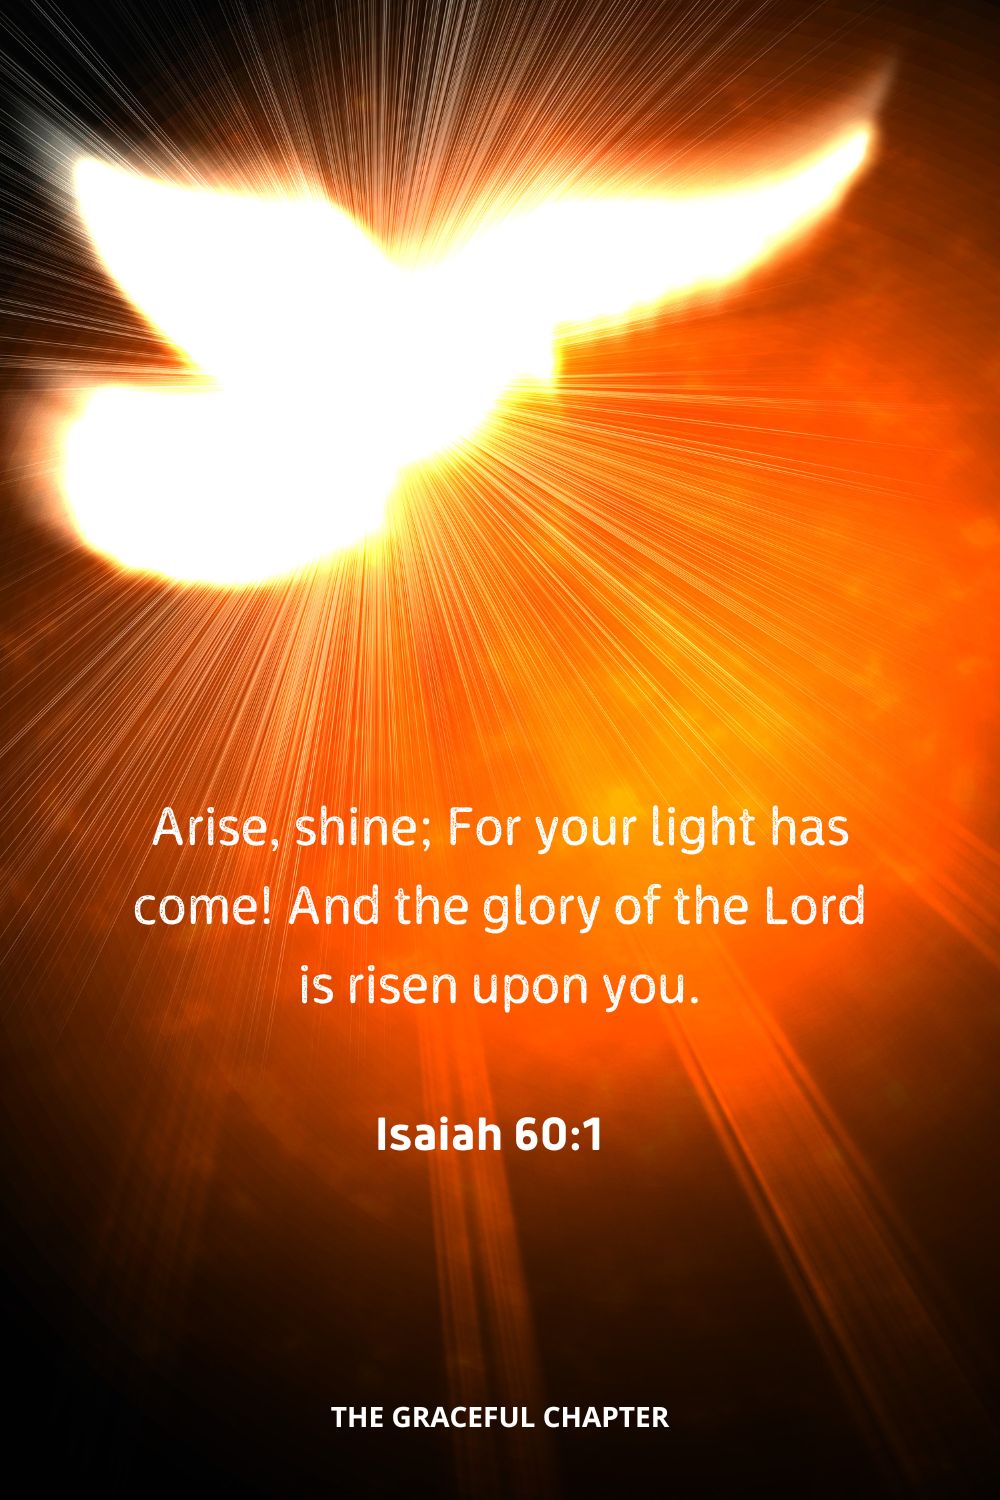 Arise, shine; For your light has come! And the glory of the Lord is risen upon you.